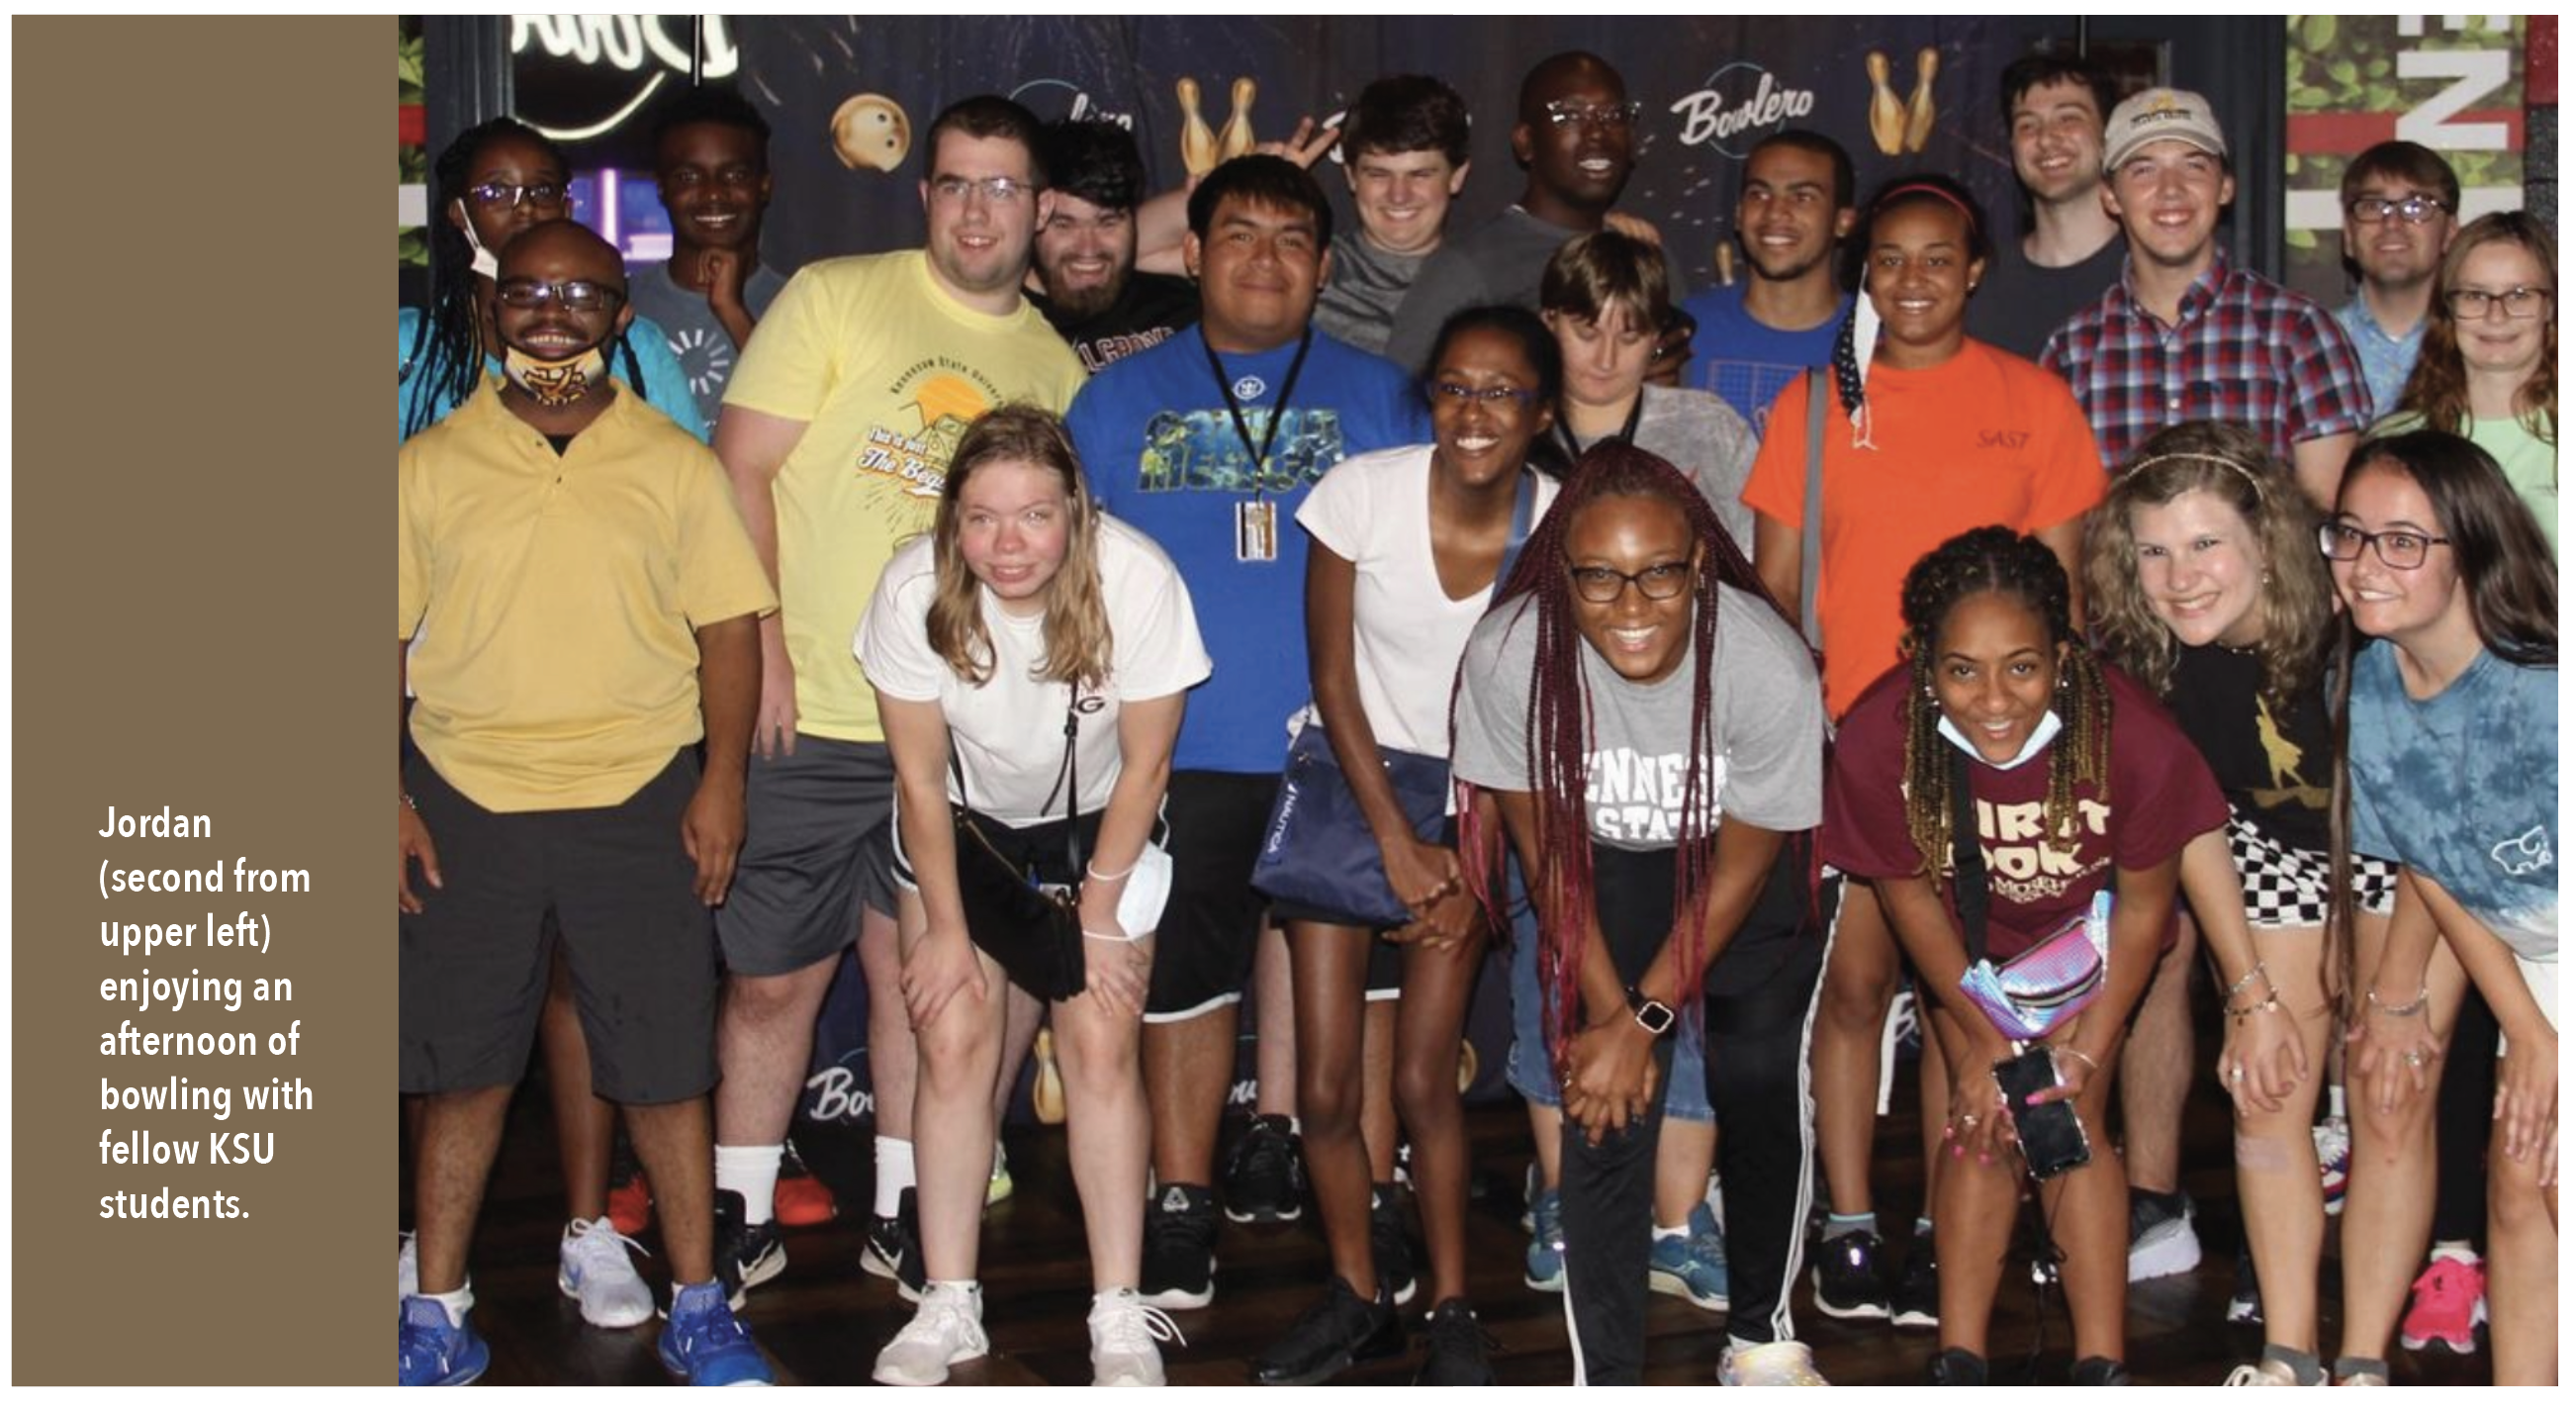 Photo of Jordan (second from upper left) enjoying an afternoon of bowling with fellow KSU students.